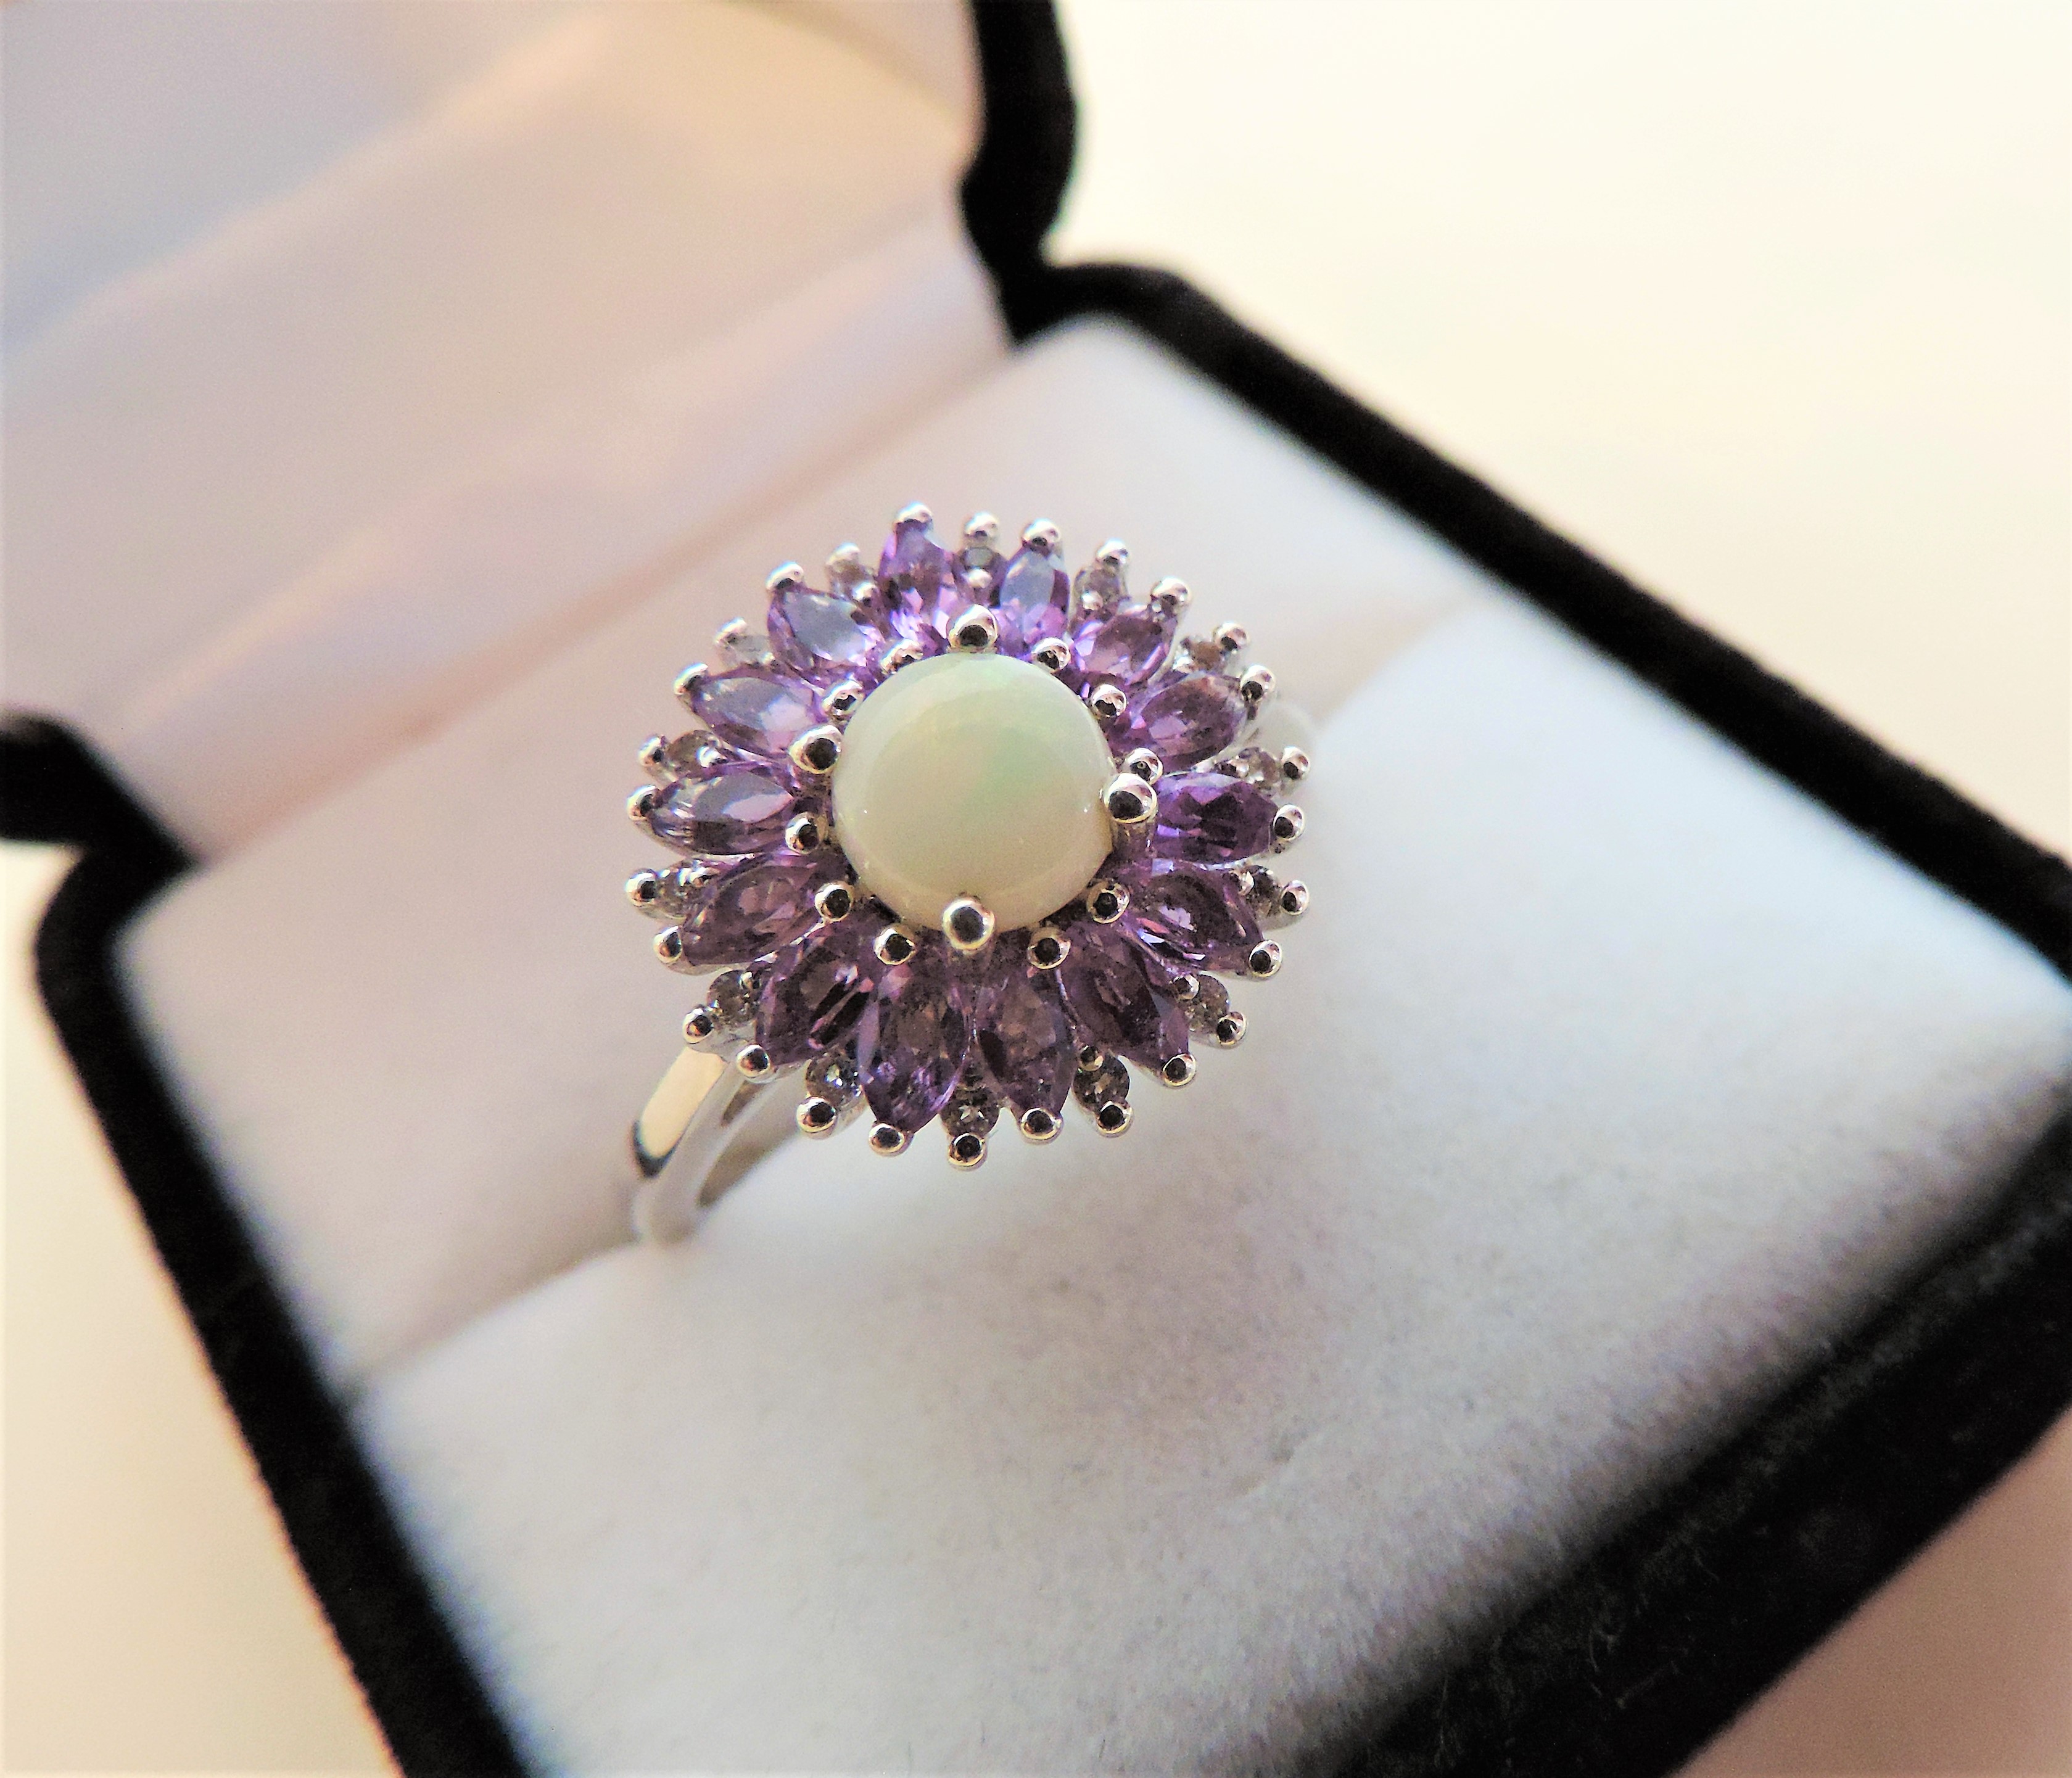 Amethyst & Opal Sterling Silver Ring - Image 2 of 4